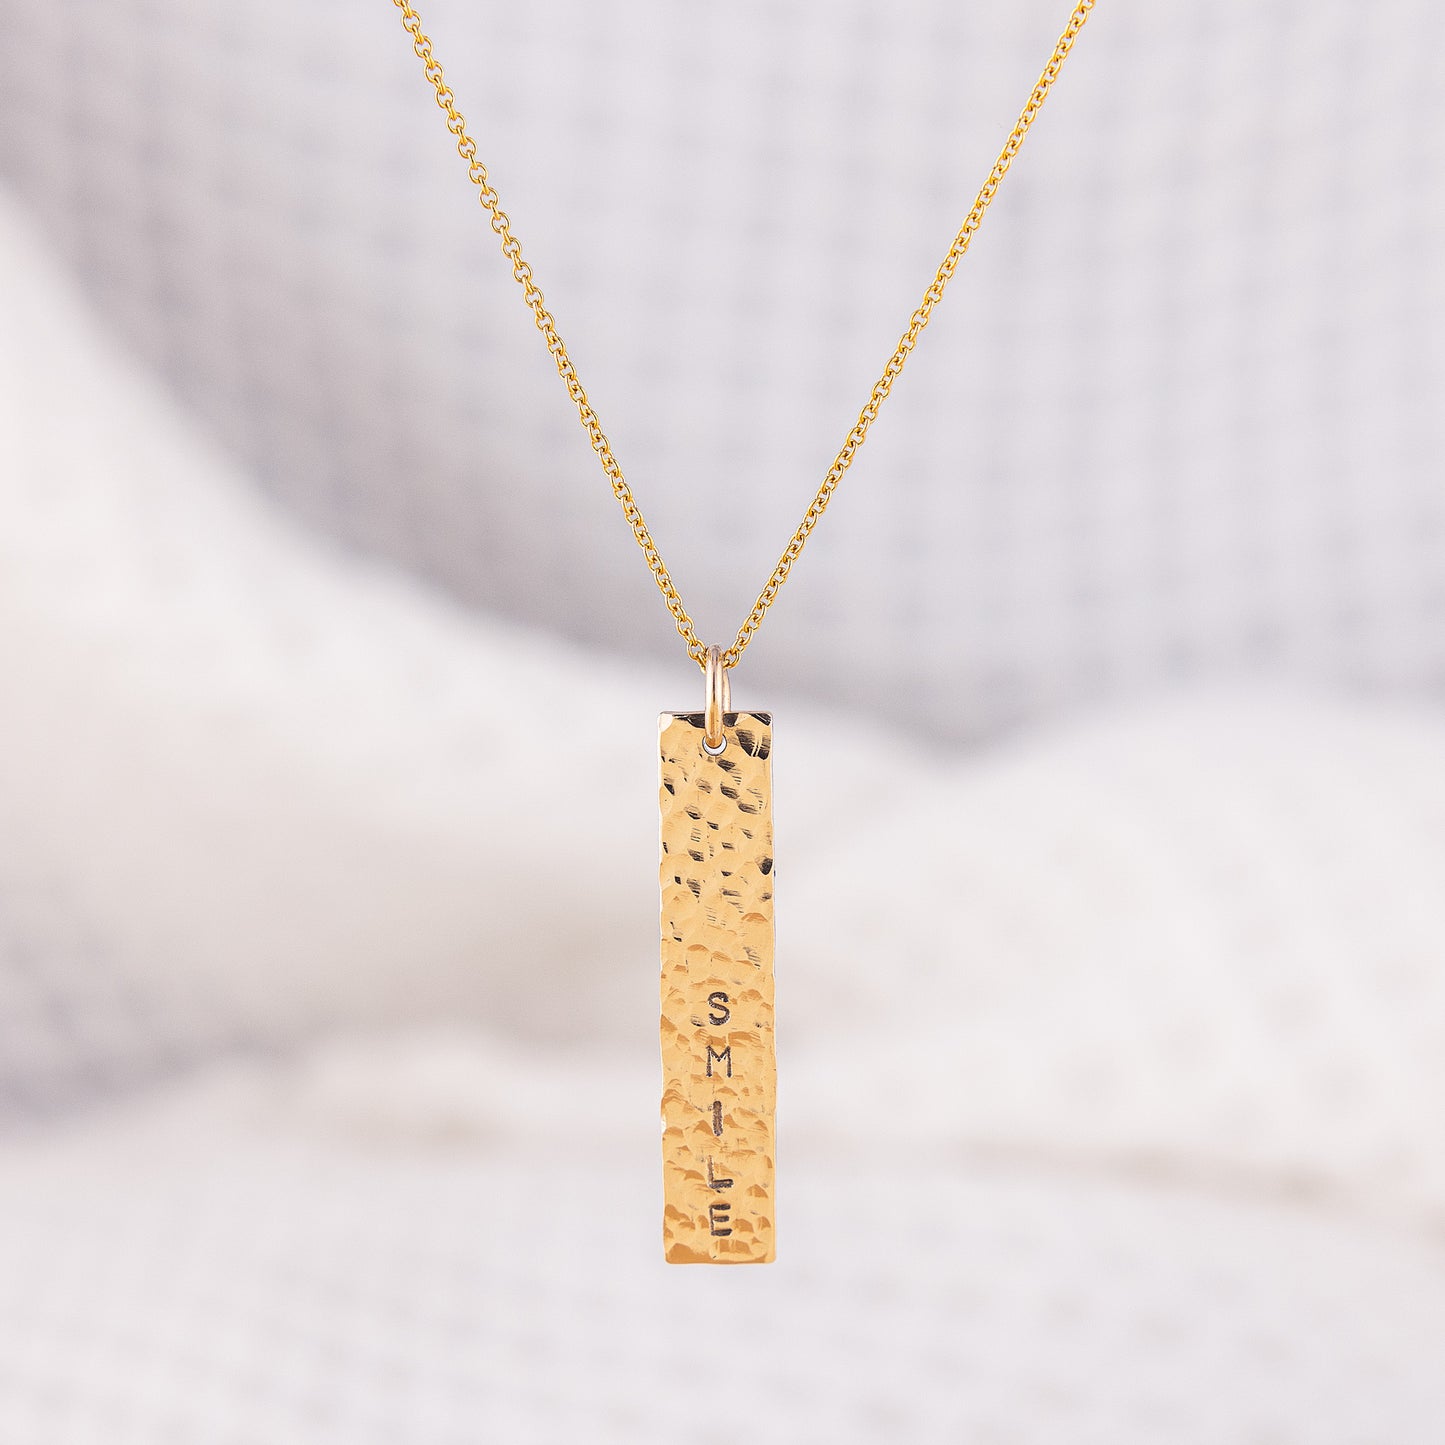 A unique, 14ct gold-filled, hammered bar pendant necklace. The pendant has a sparkly, textured finished and is stamped with a custom word of your choice. On a dainty 16 inch chain with 2 inch extension.